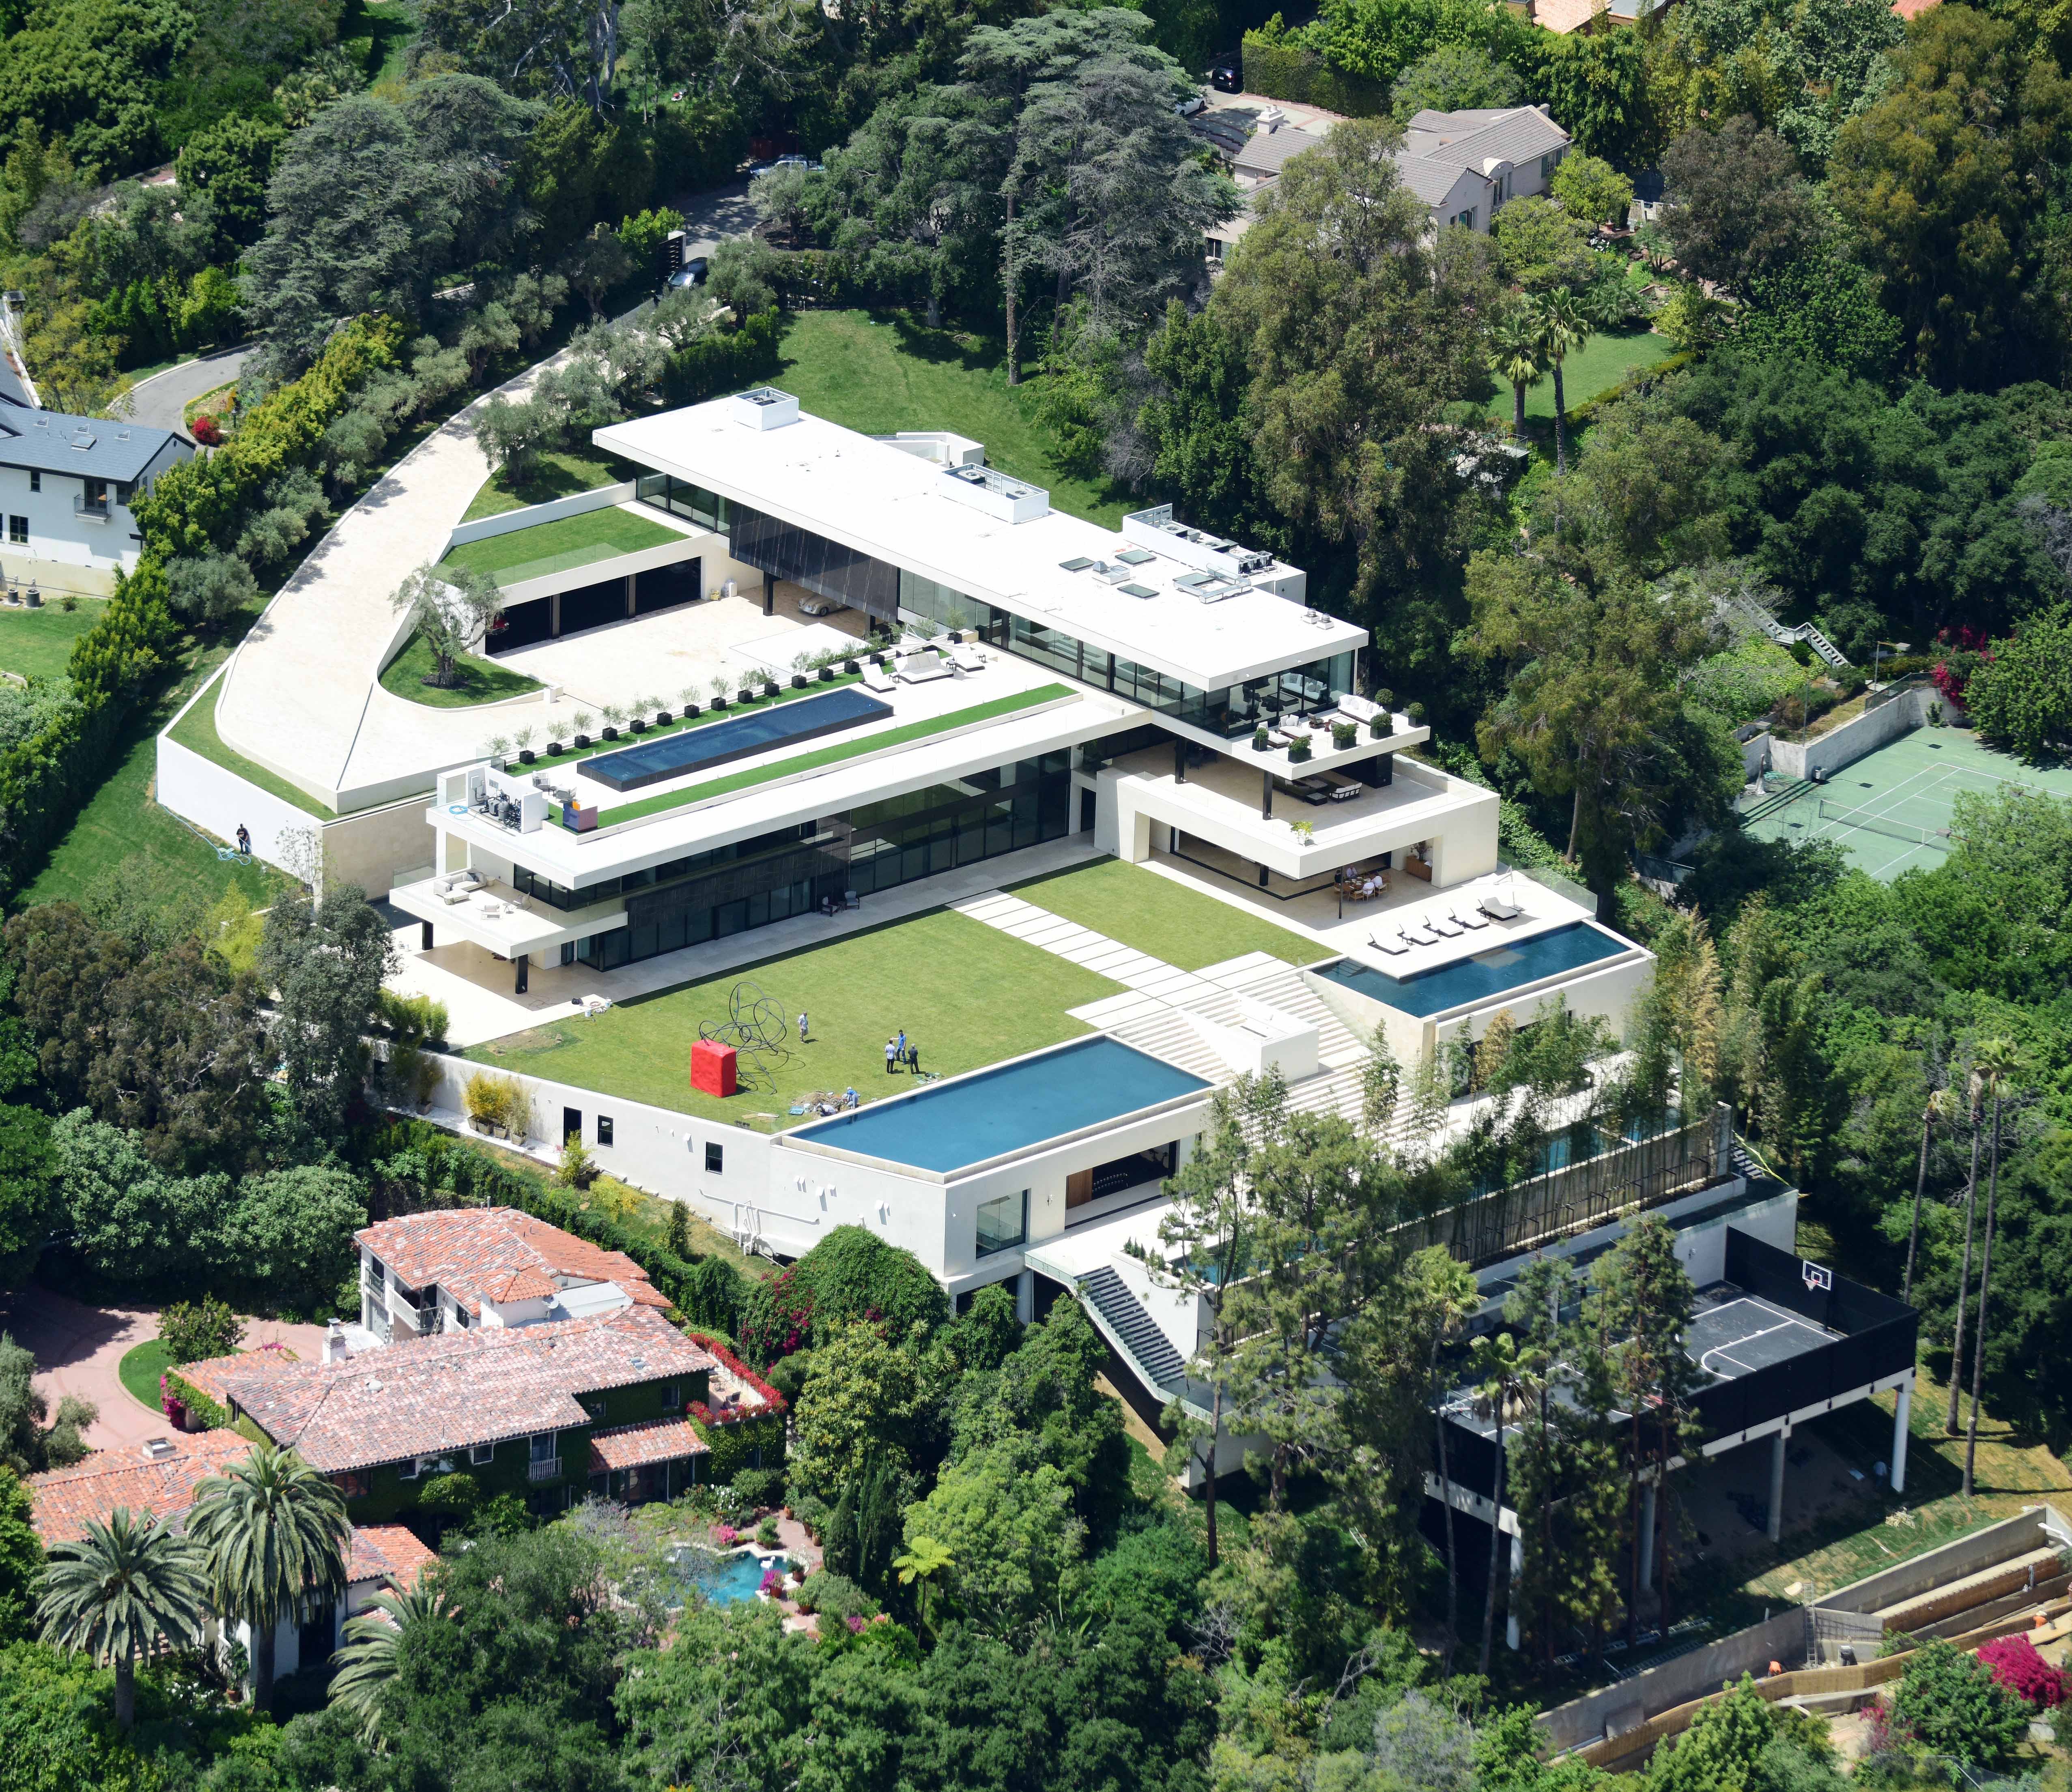 Beyonce and Jay-Z new home in Bel Air